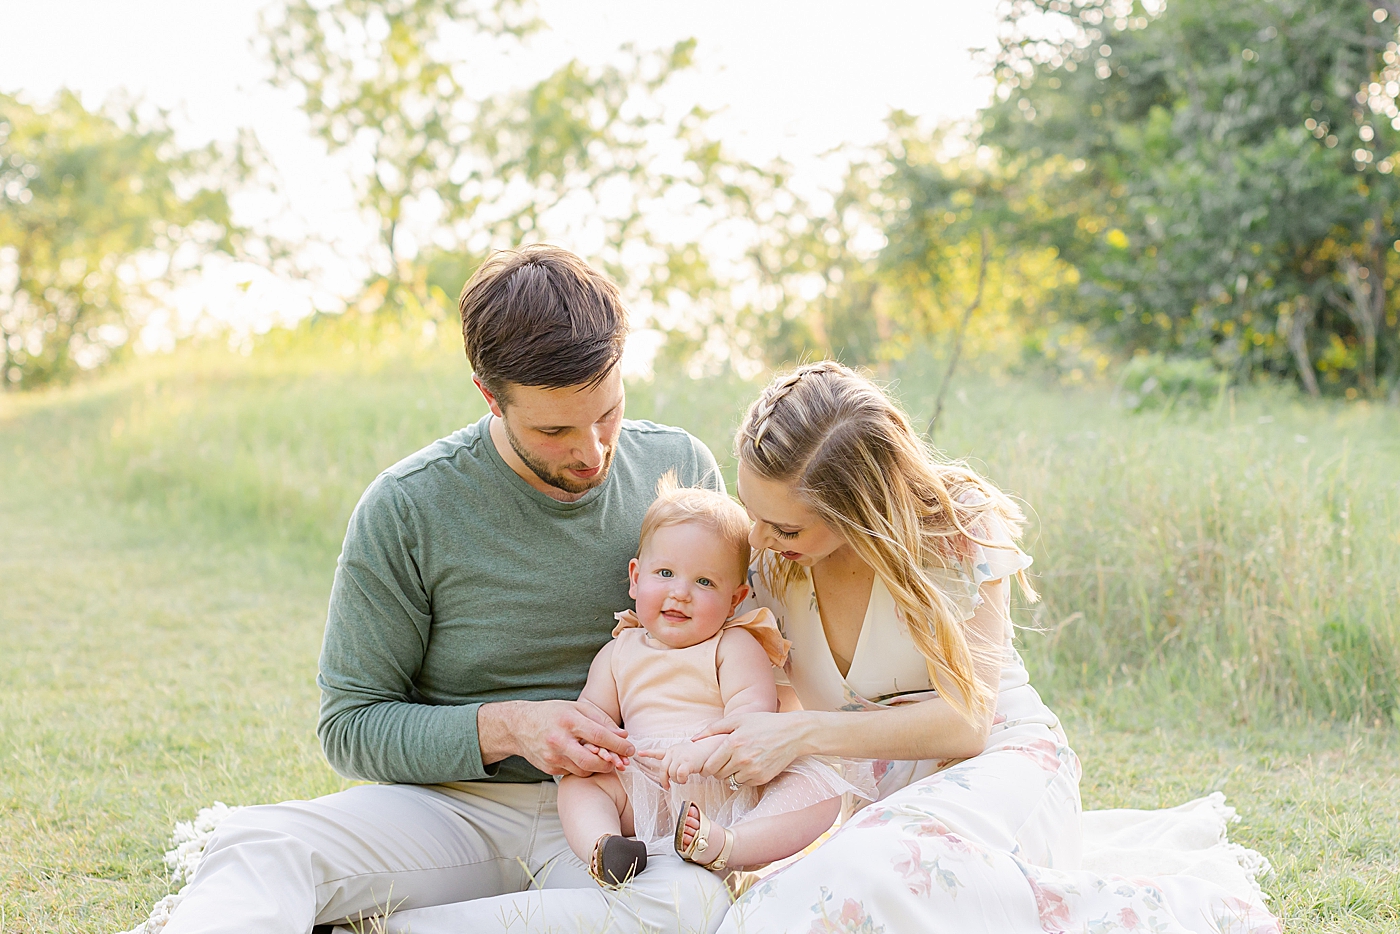 Mom and dad sitting in a field with their baby girl | Sana Ahmed Photography